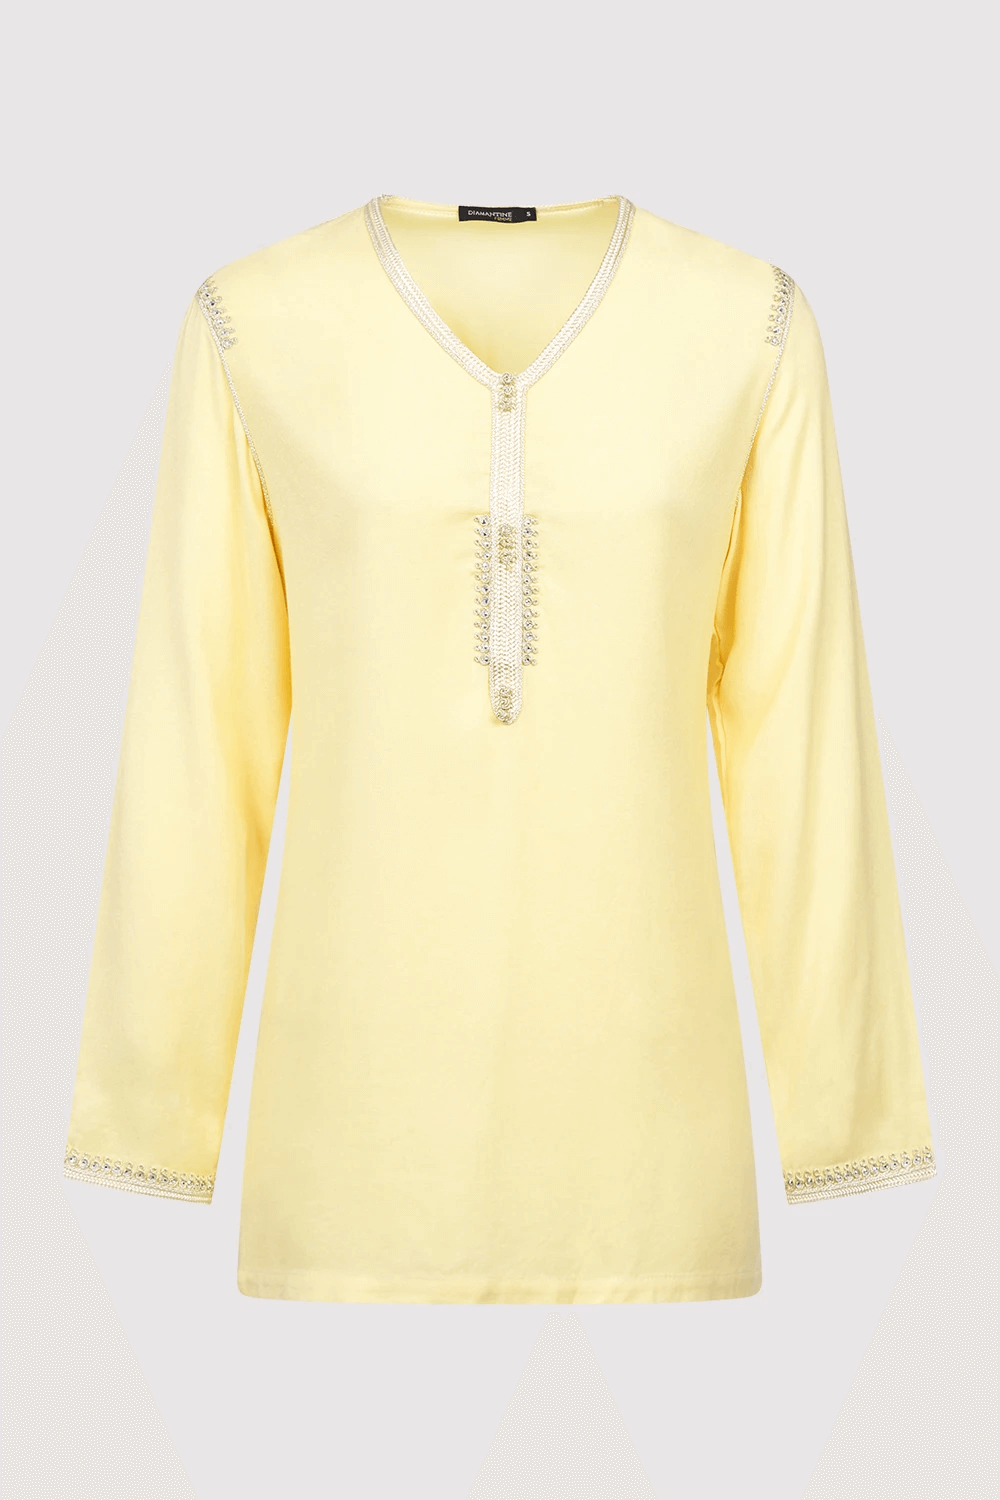 Dream Longline V-Neck Embroidered Shoulder Casual Long Sleeve Top in Yellow